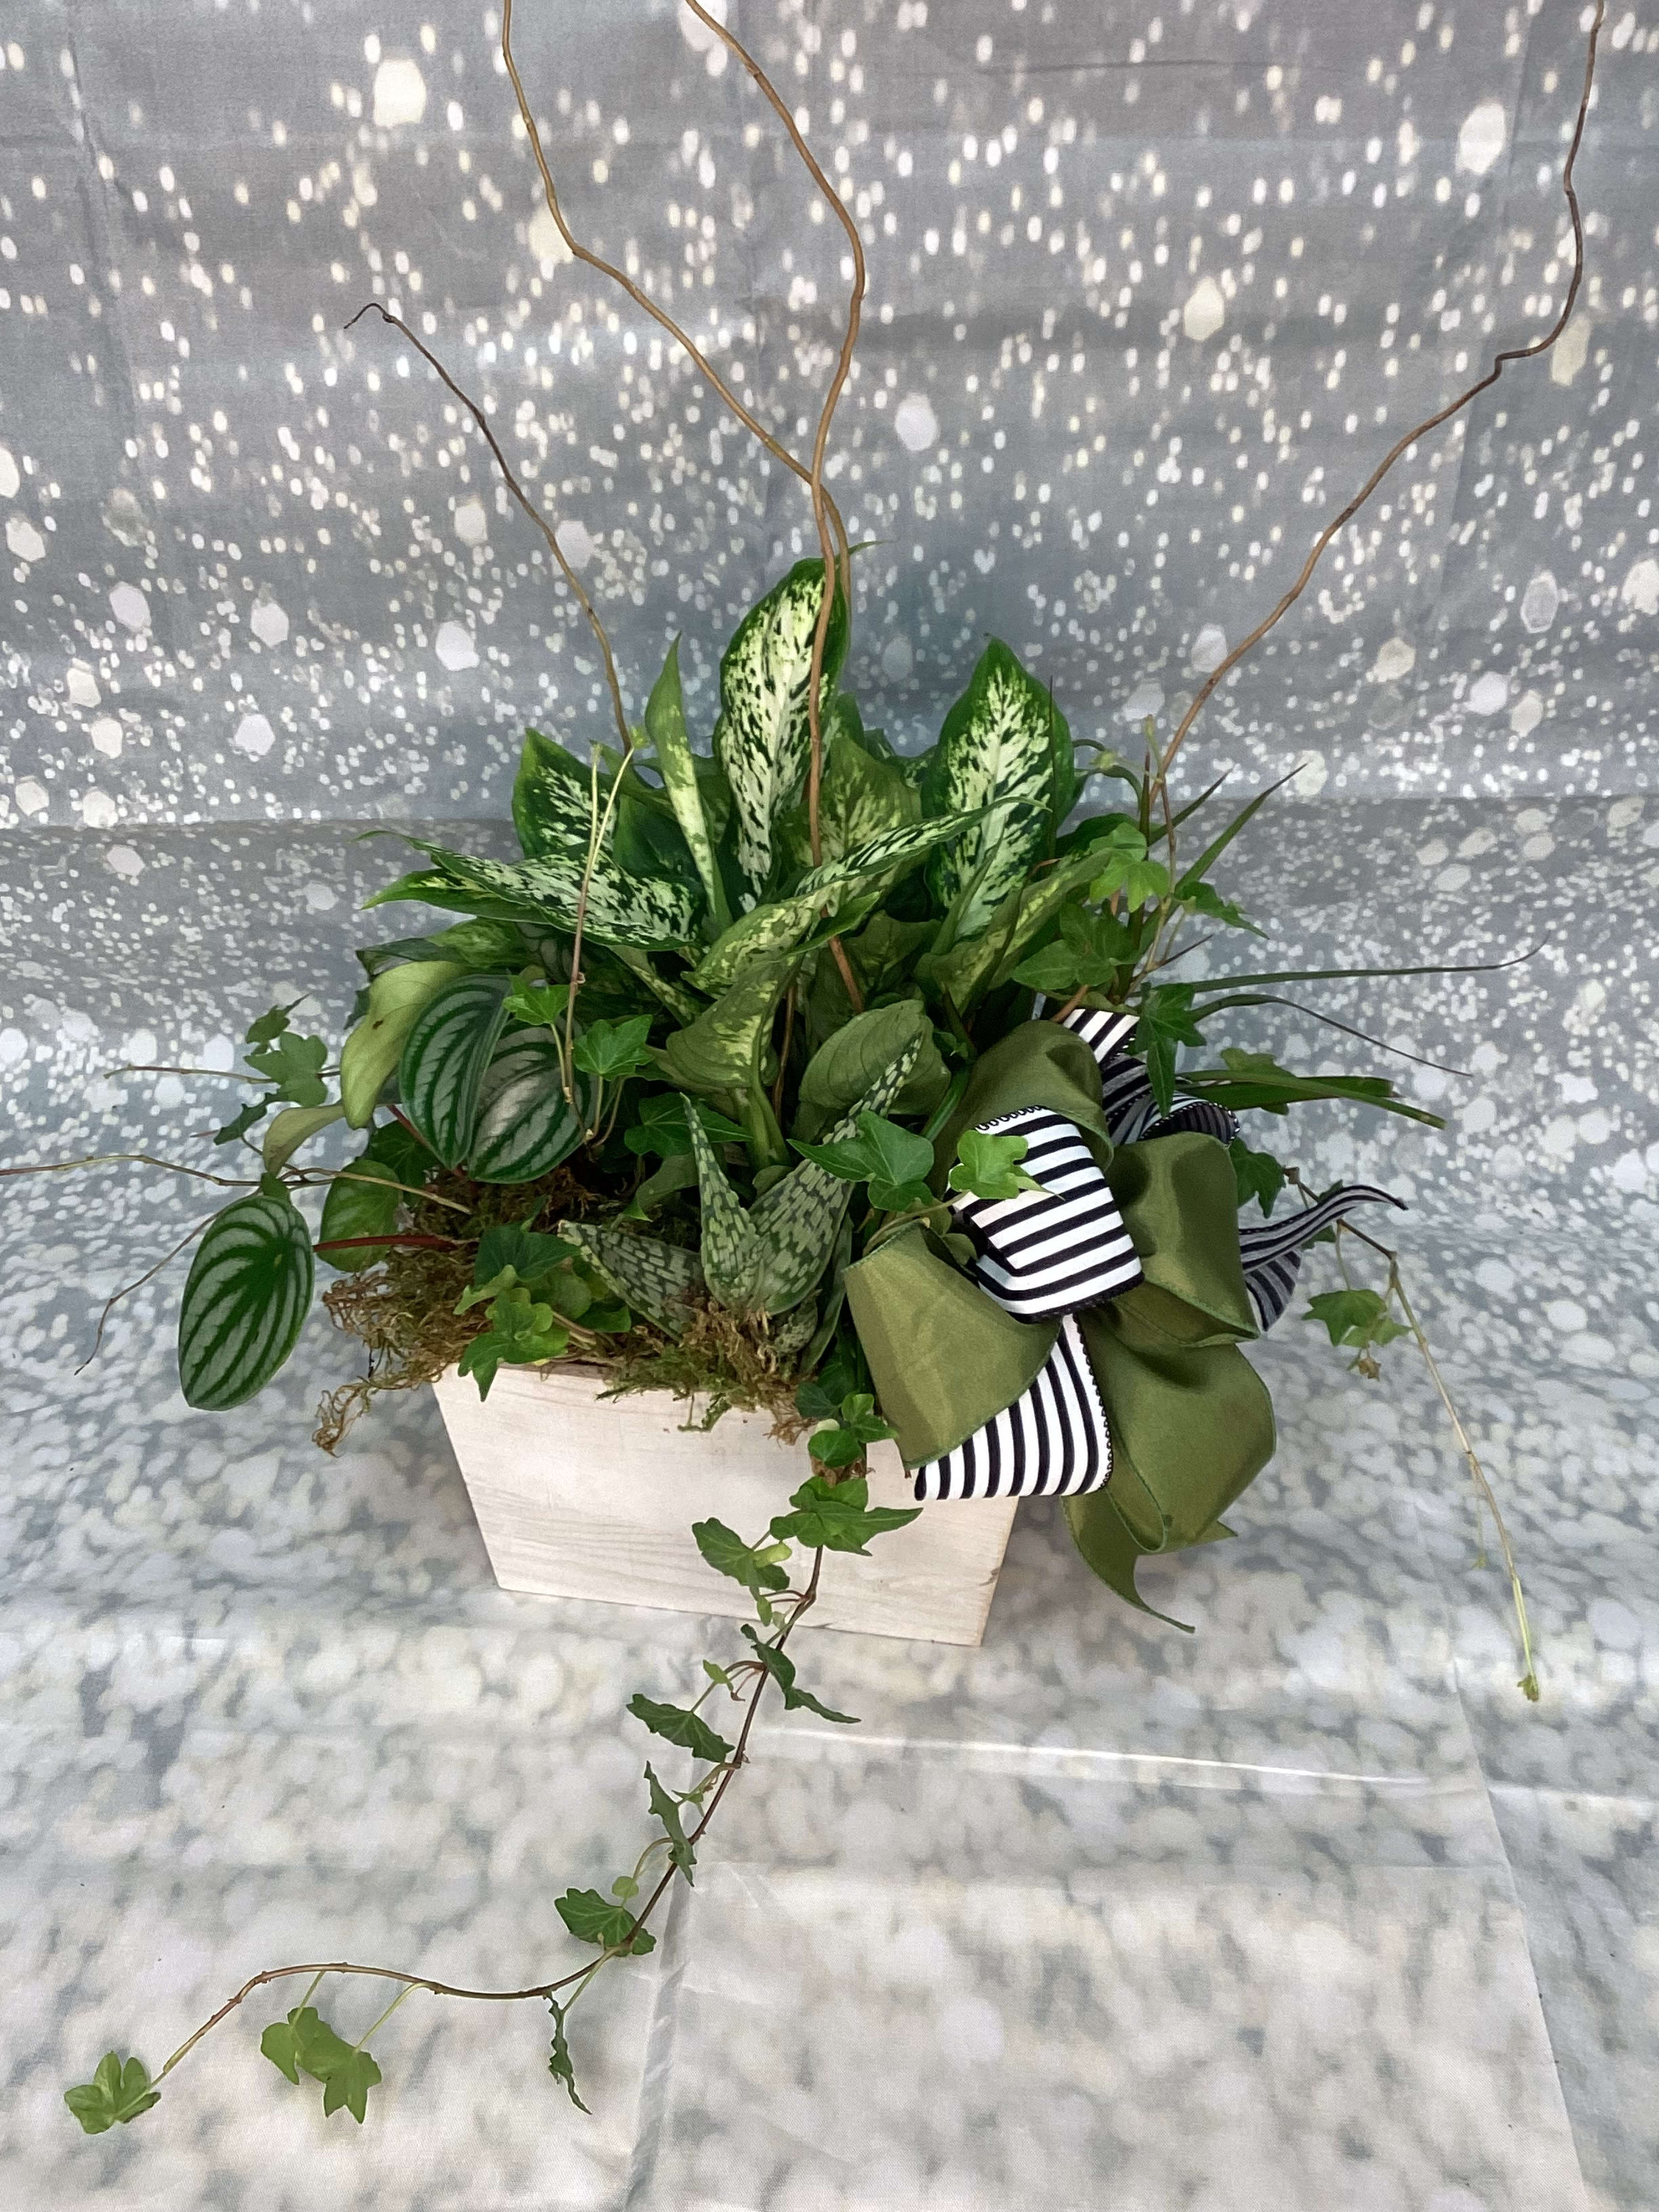 Garden Galore - This Green Plant Garden Has A Sophisticated Yet Casual Look That Compliments Any Situation. A Variety Of Stunning Green Plants Are Potted Into One Of Our Complimenting Assorted Wood Boxes Adorned With Curly Willow Branches For Flair &amp; A Bow For The Final Touch. 